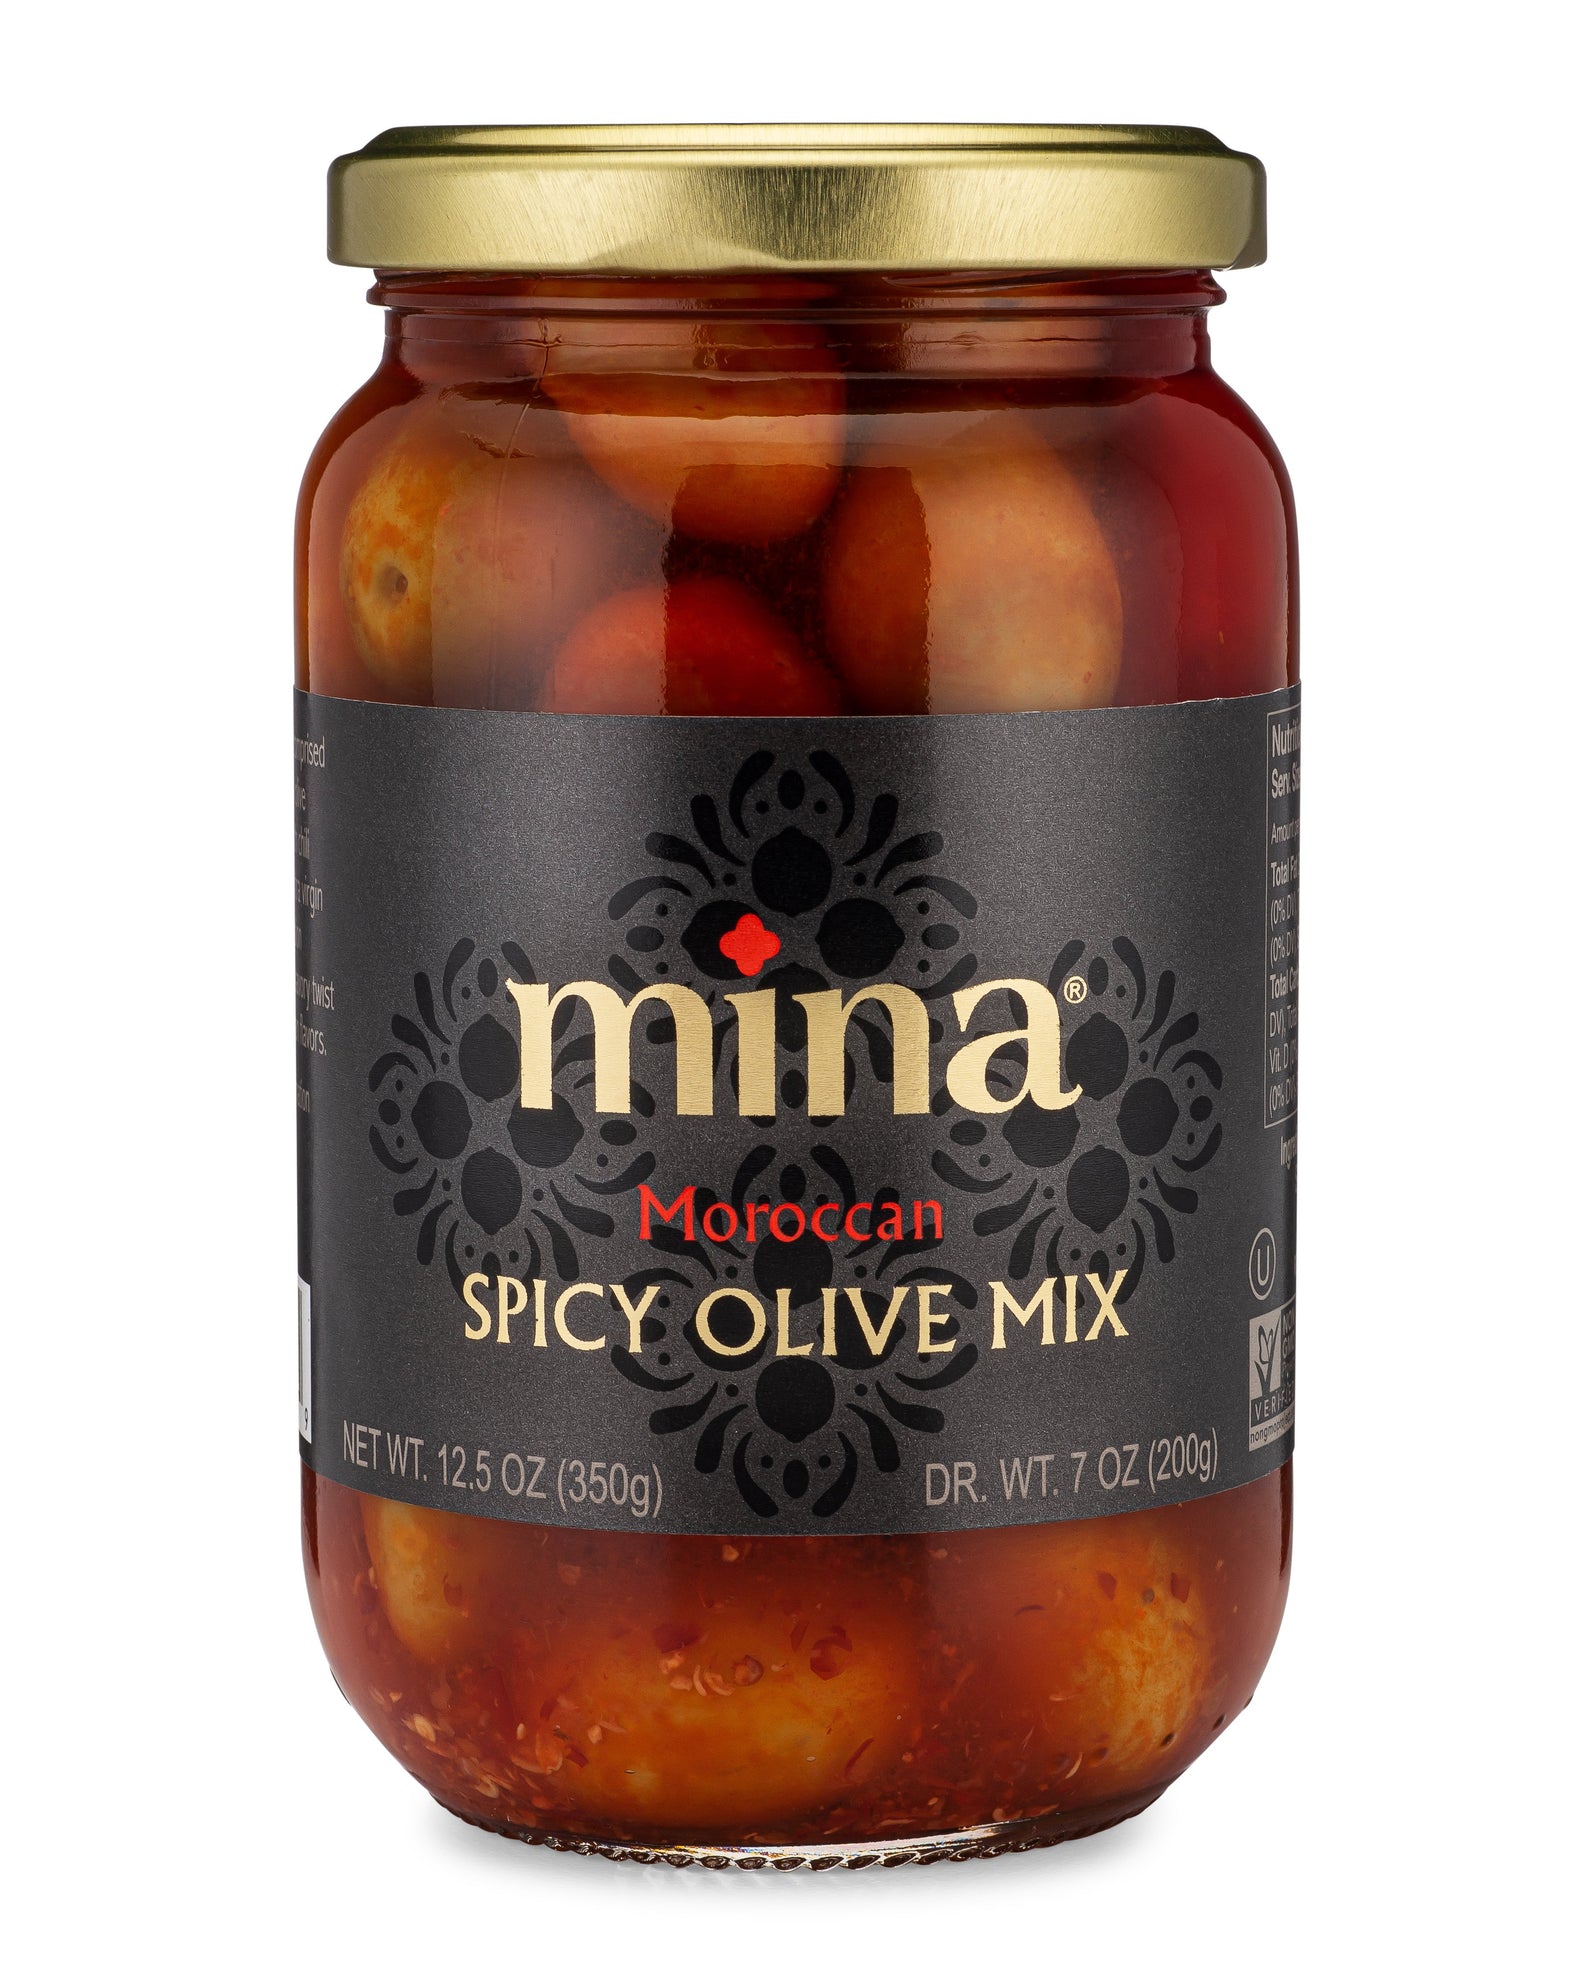 Spicy Olive Mix